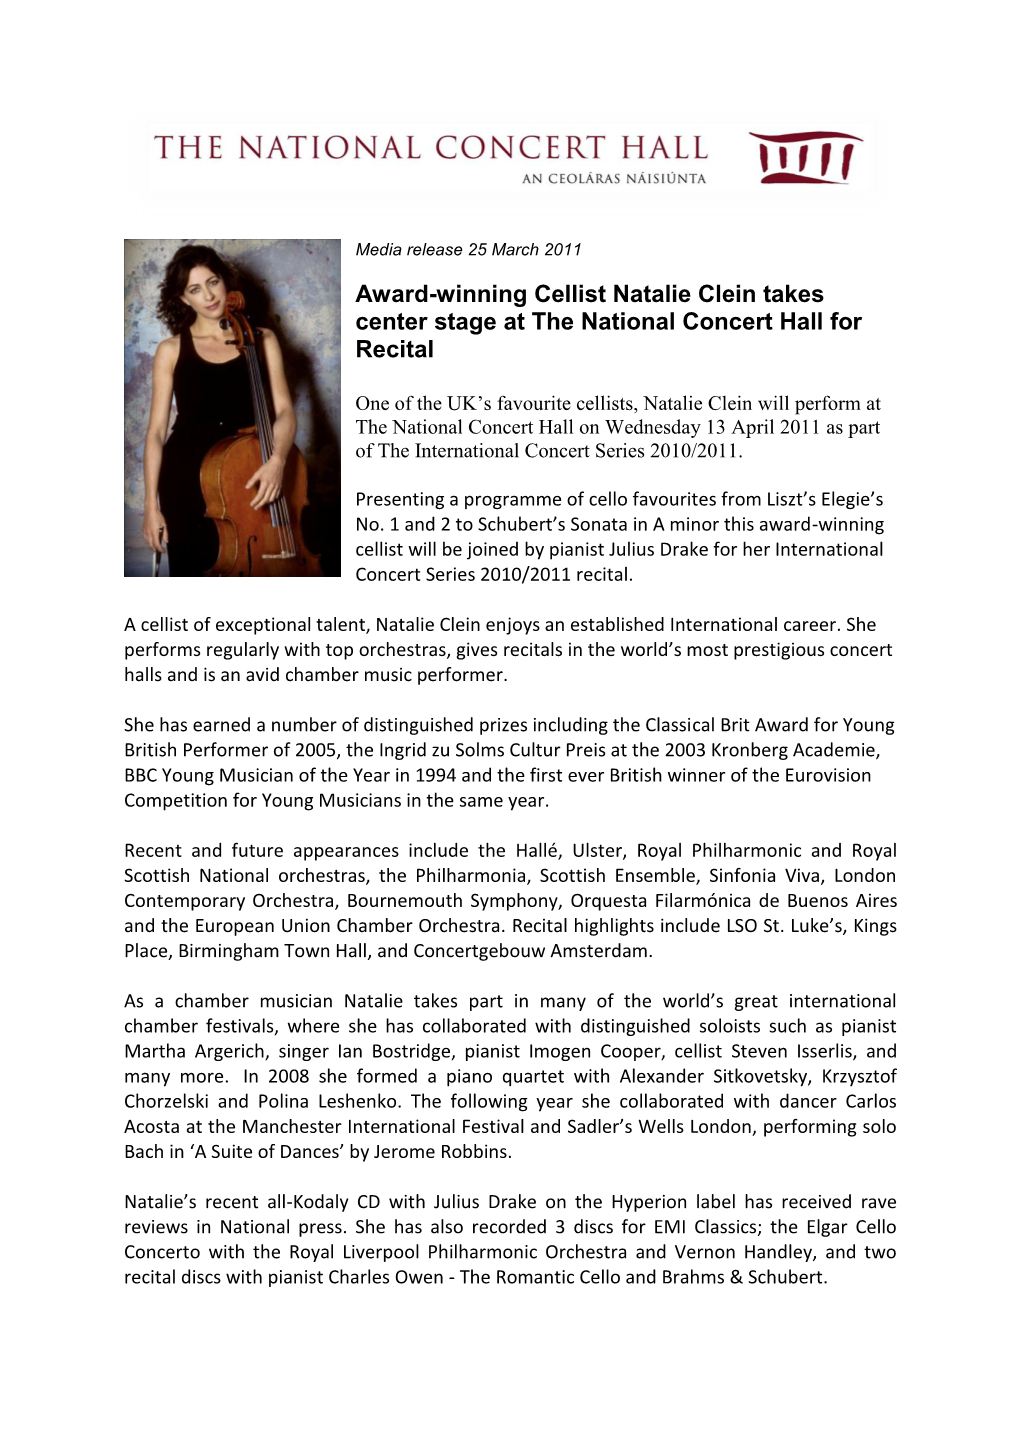 Award-Winning Cellist Natalie Clein Takes Center Stage at the National Concert Hall for Recital